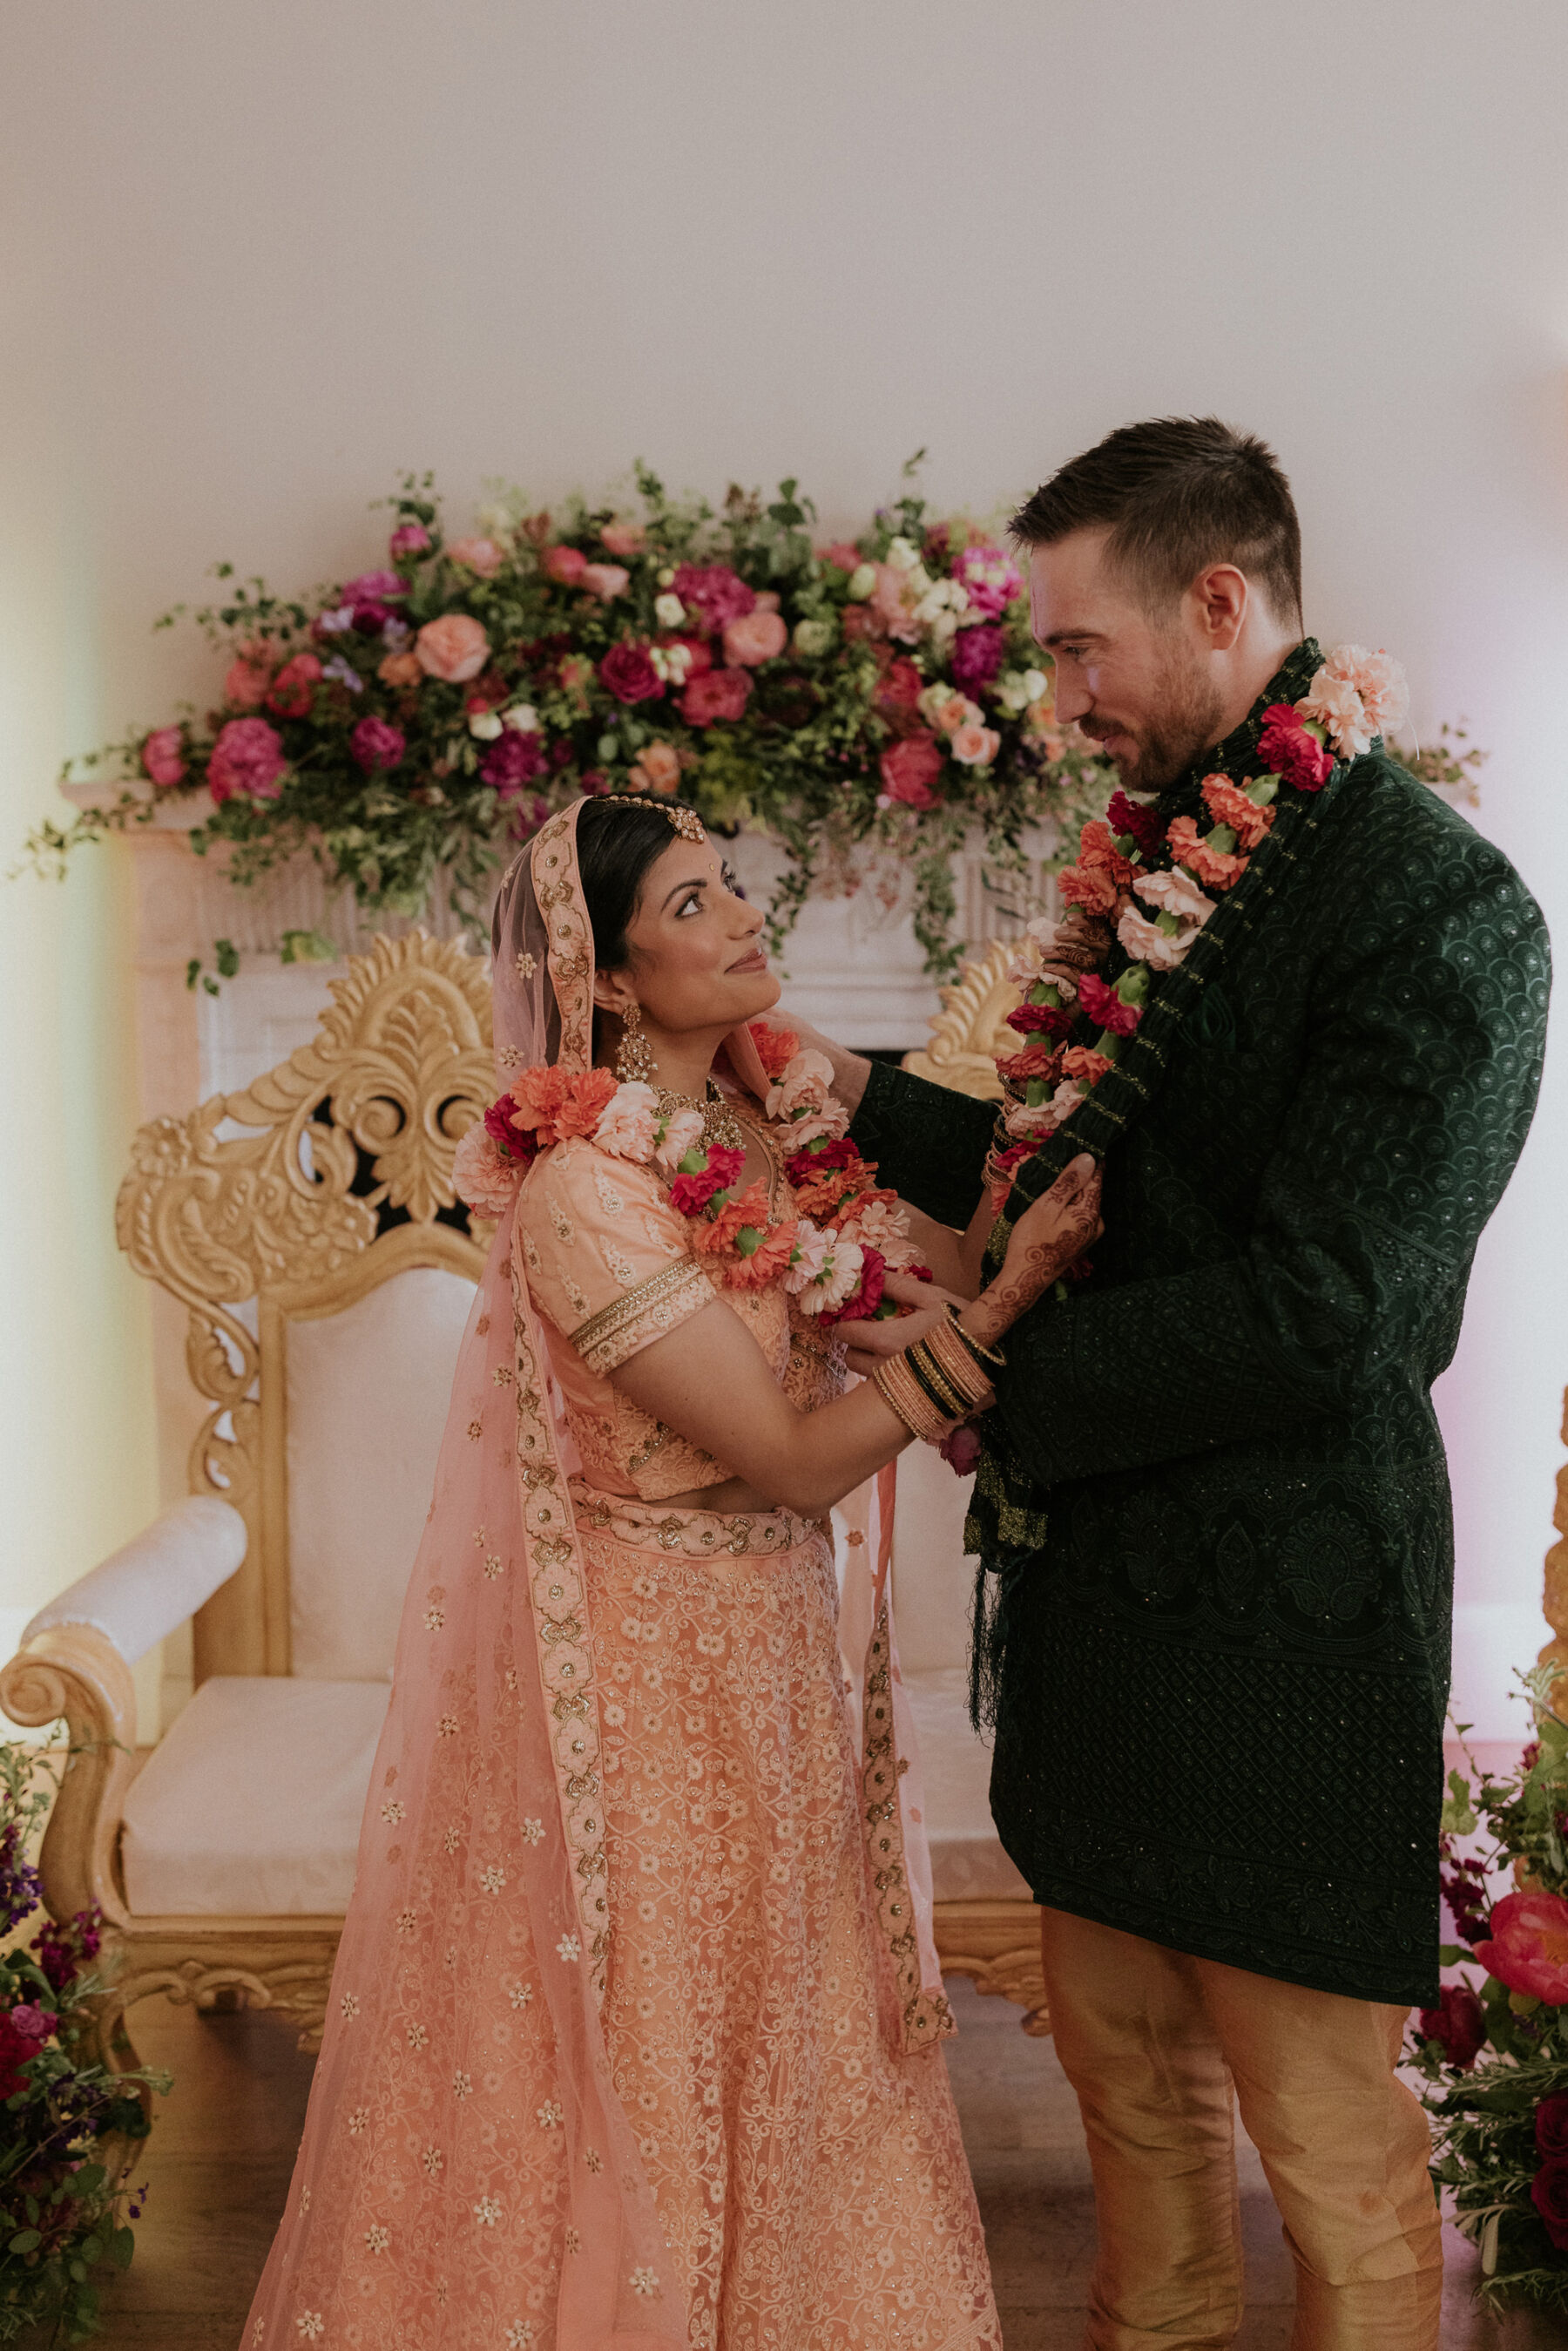 Indian bride at Hindu wedding ceremony in pink lehenga and floral garland